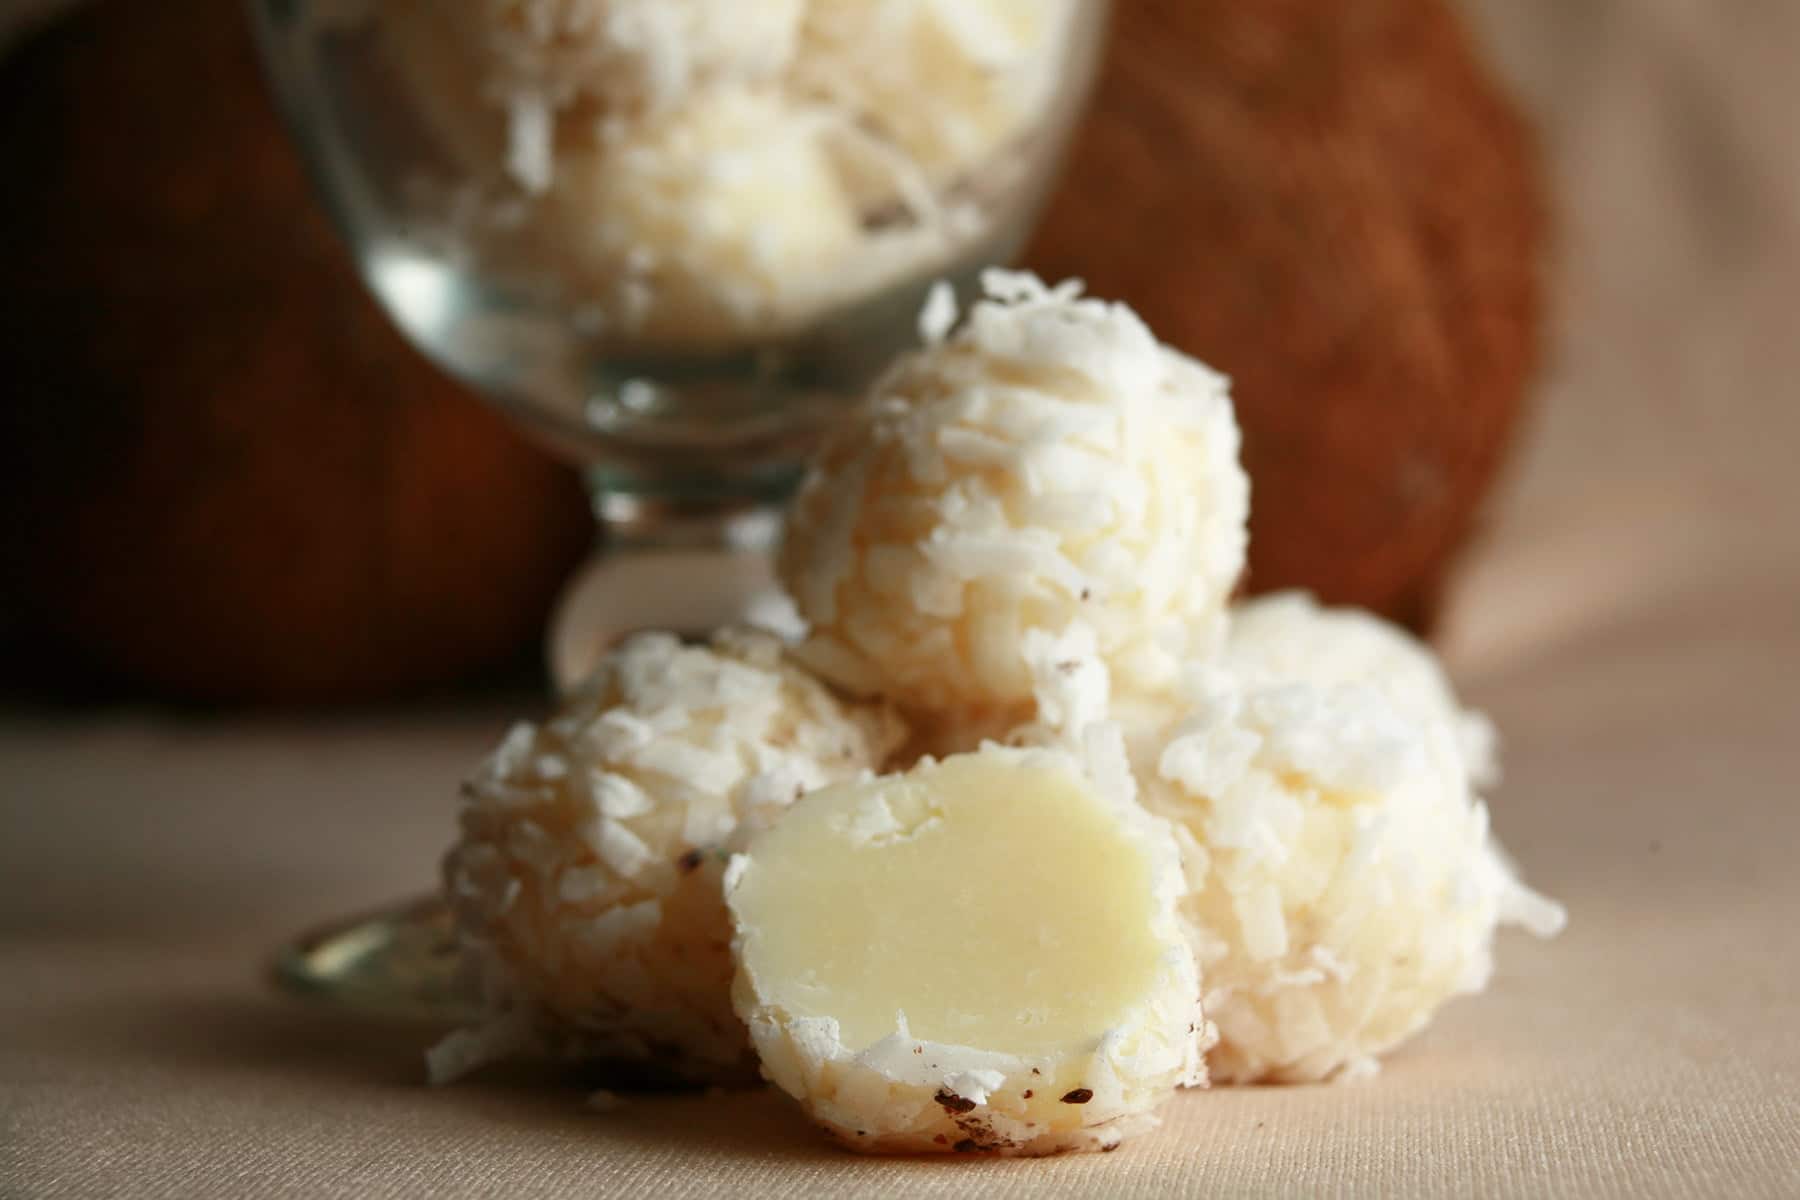 Several Tropical White Chocolate Truffles are piled at the base of a cocktail glass. More truffles are contaied within the glass, and there is a coconut behind it.